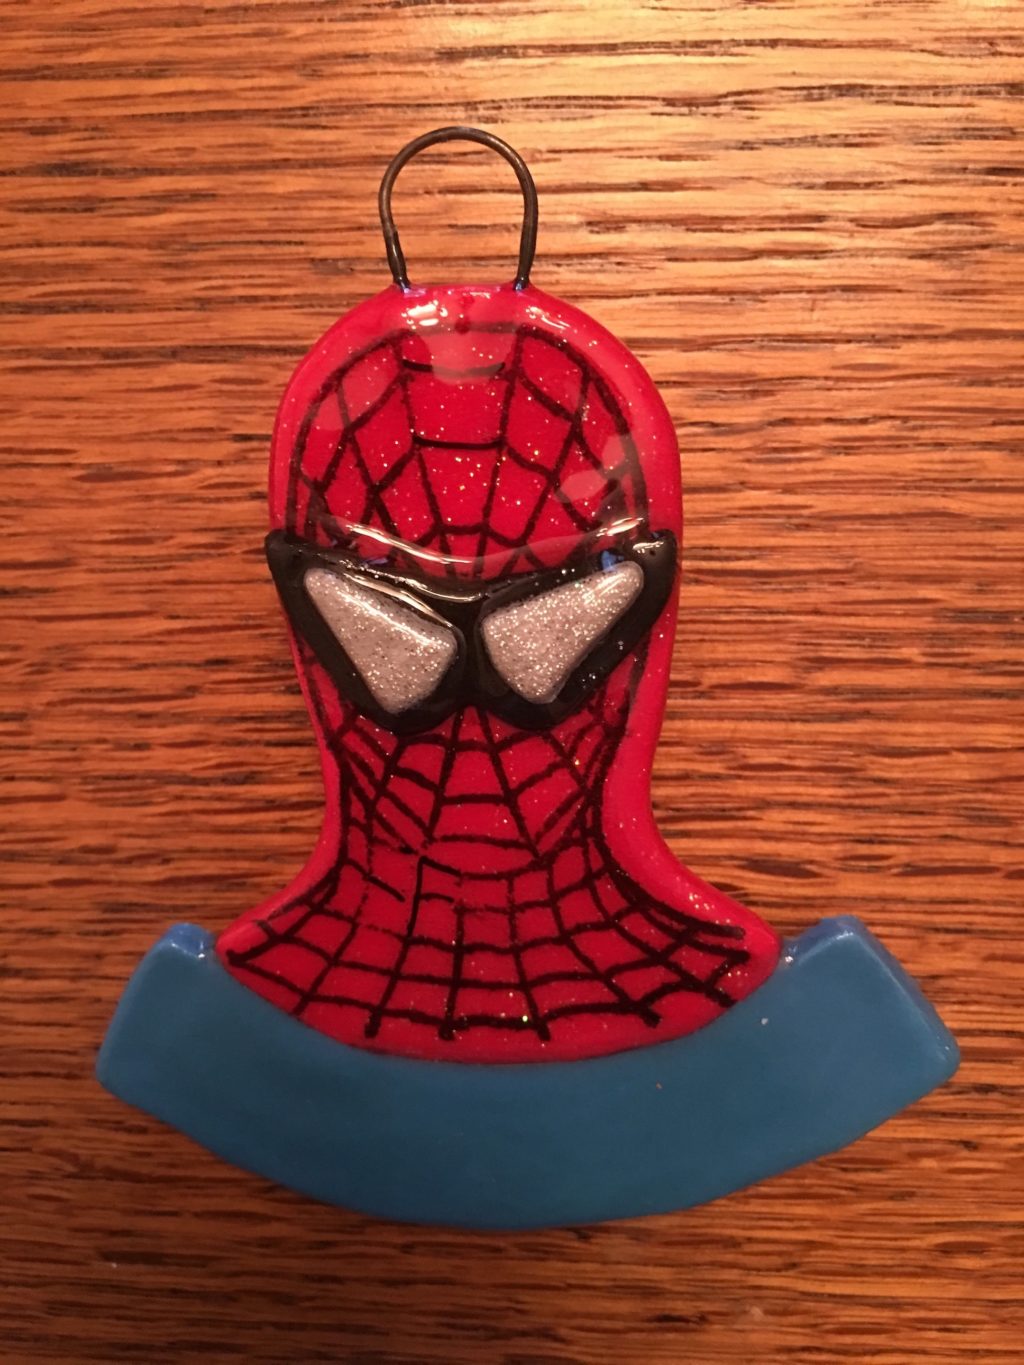 A spider man ornament hanging on the wall.